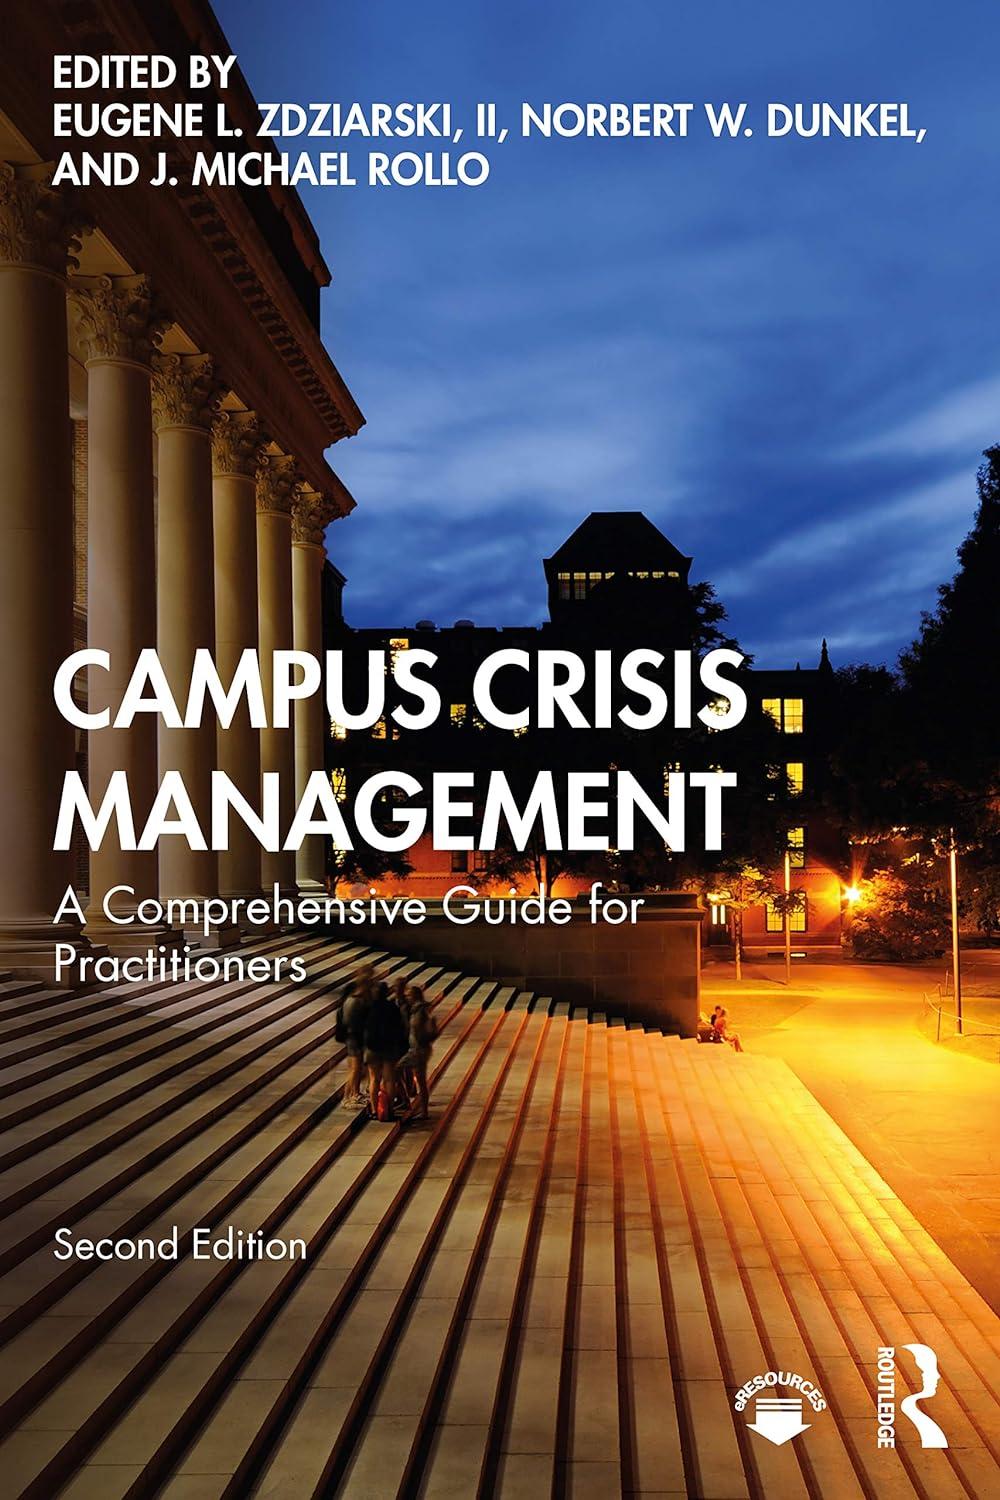 campus crisis management a comprehensive guide for practitioners 2nd edition eugene l. zdziarski, norbert w.